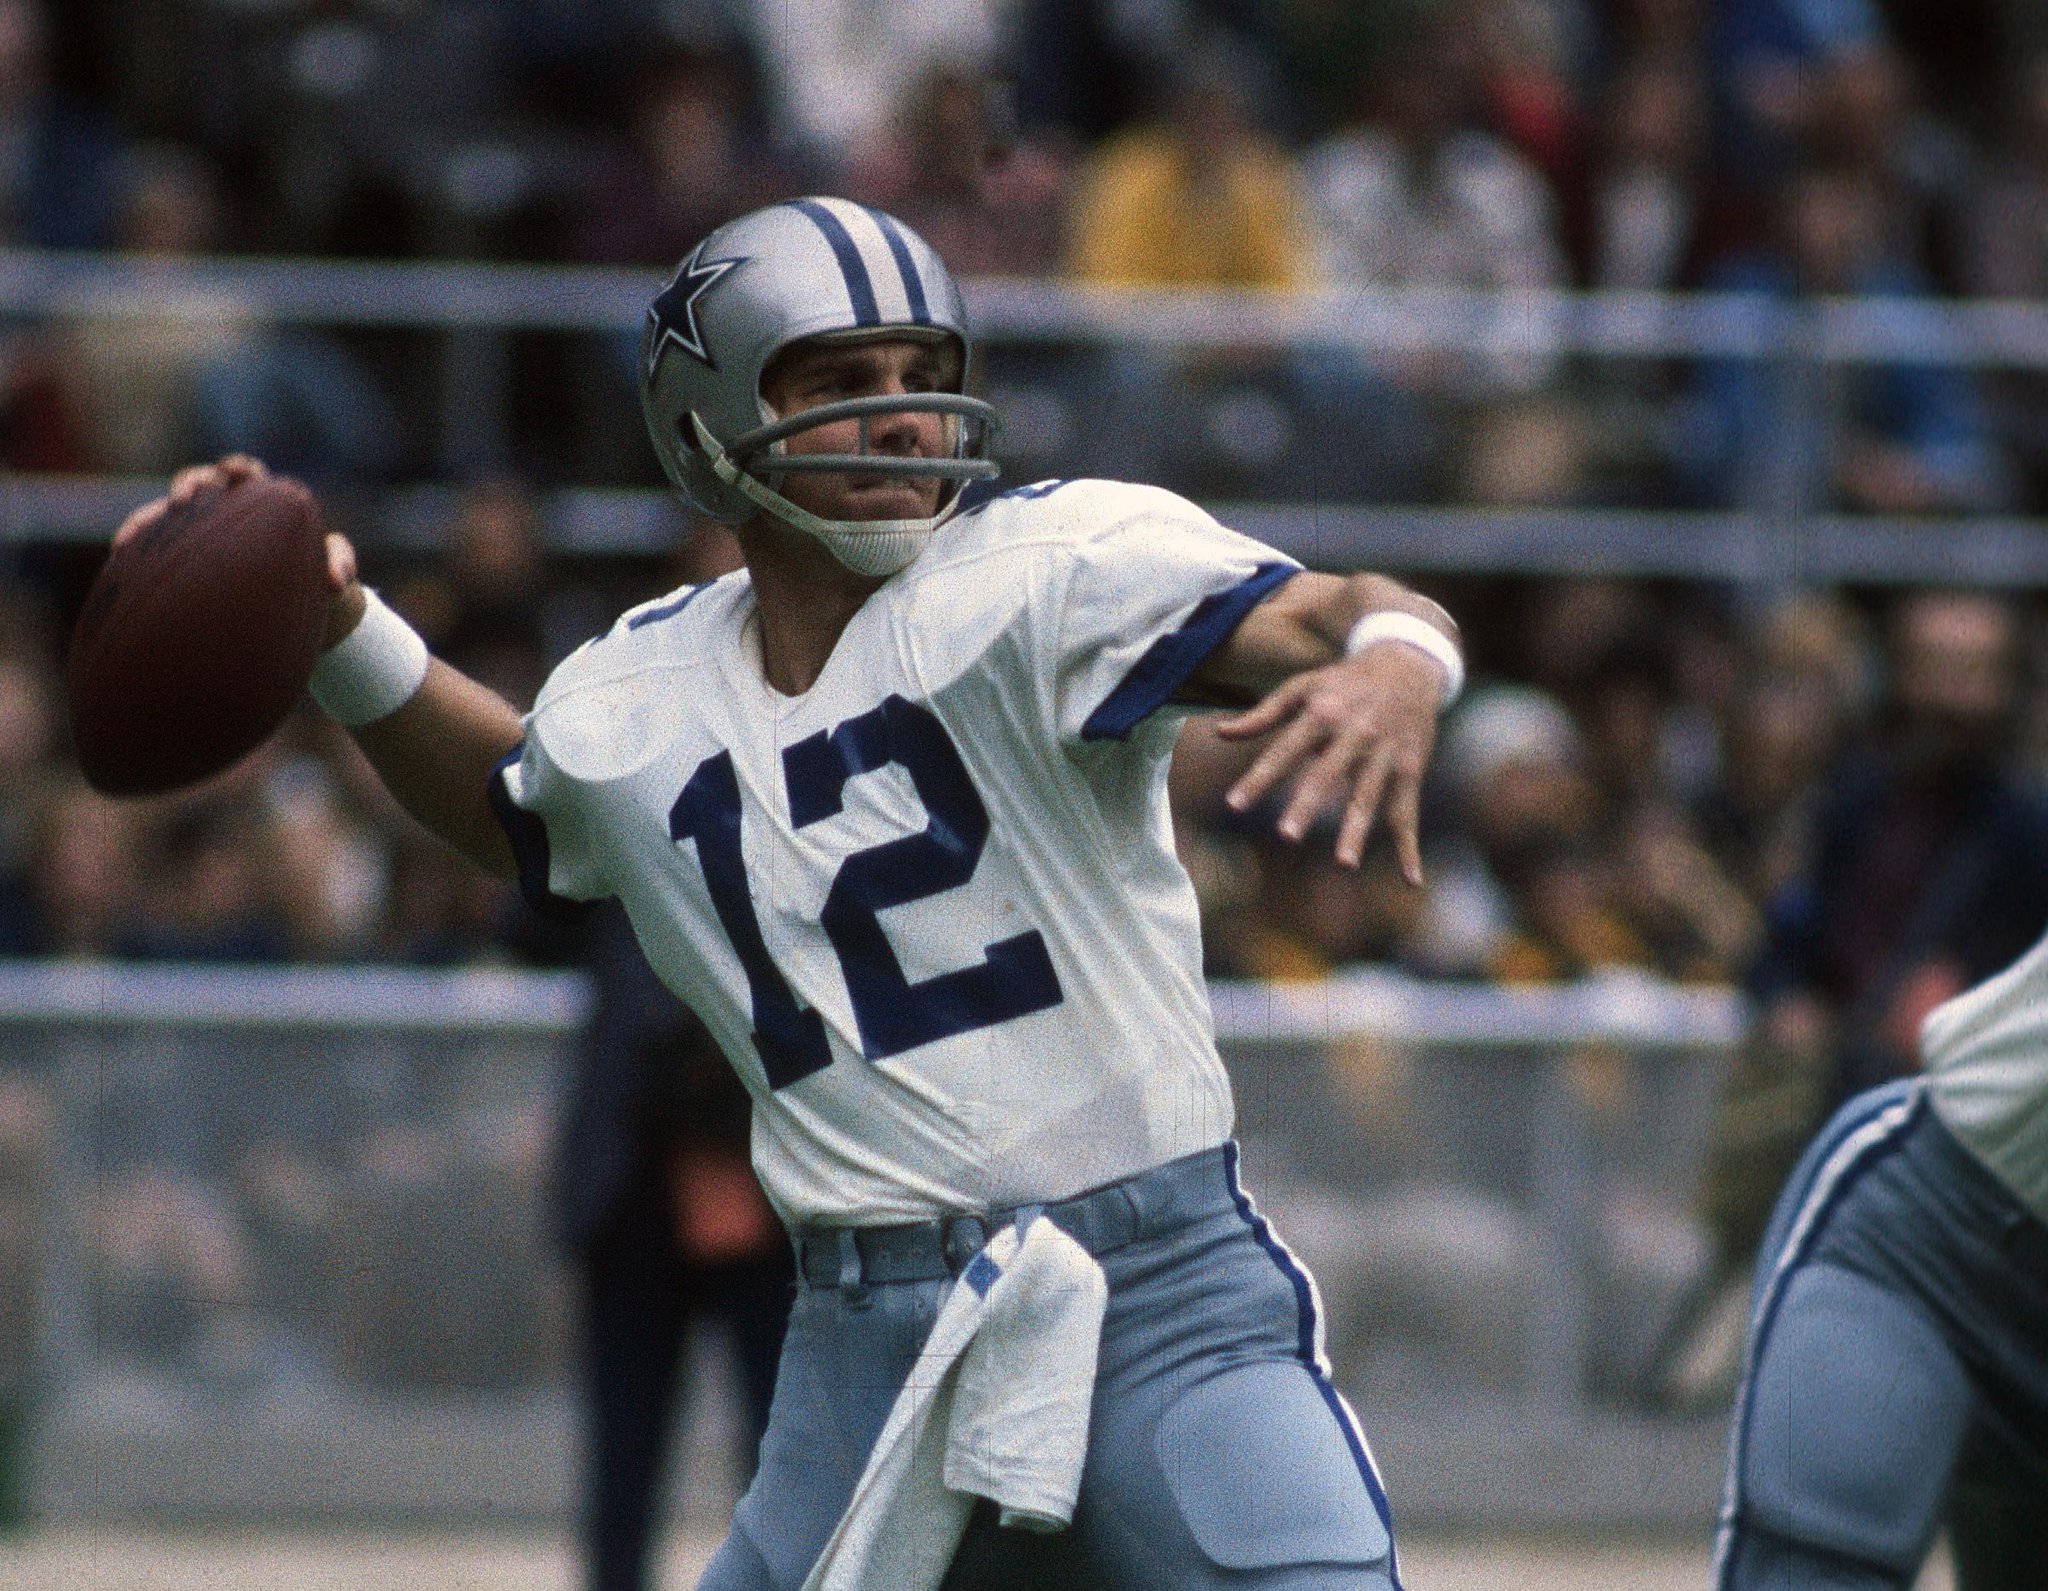 Happy birthday to one of the greatest QBs ever: Heisman Trophy & 2x Super Bowl winner Roger Staubach! 